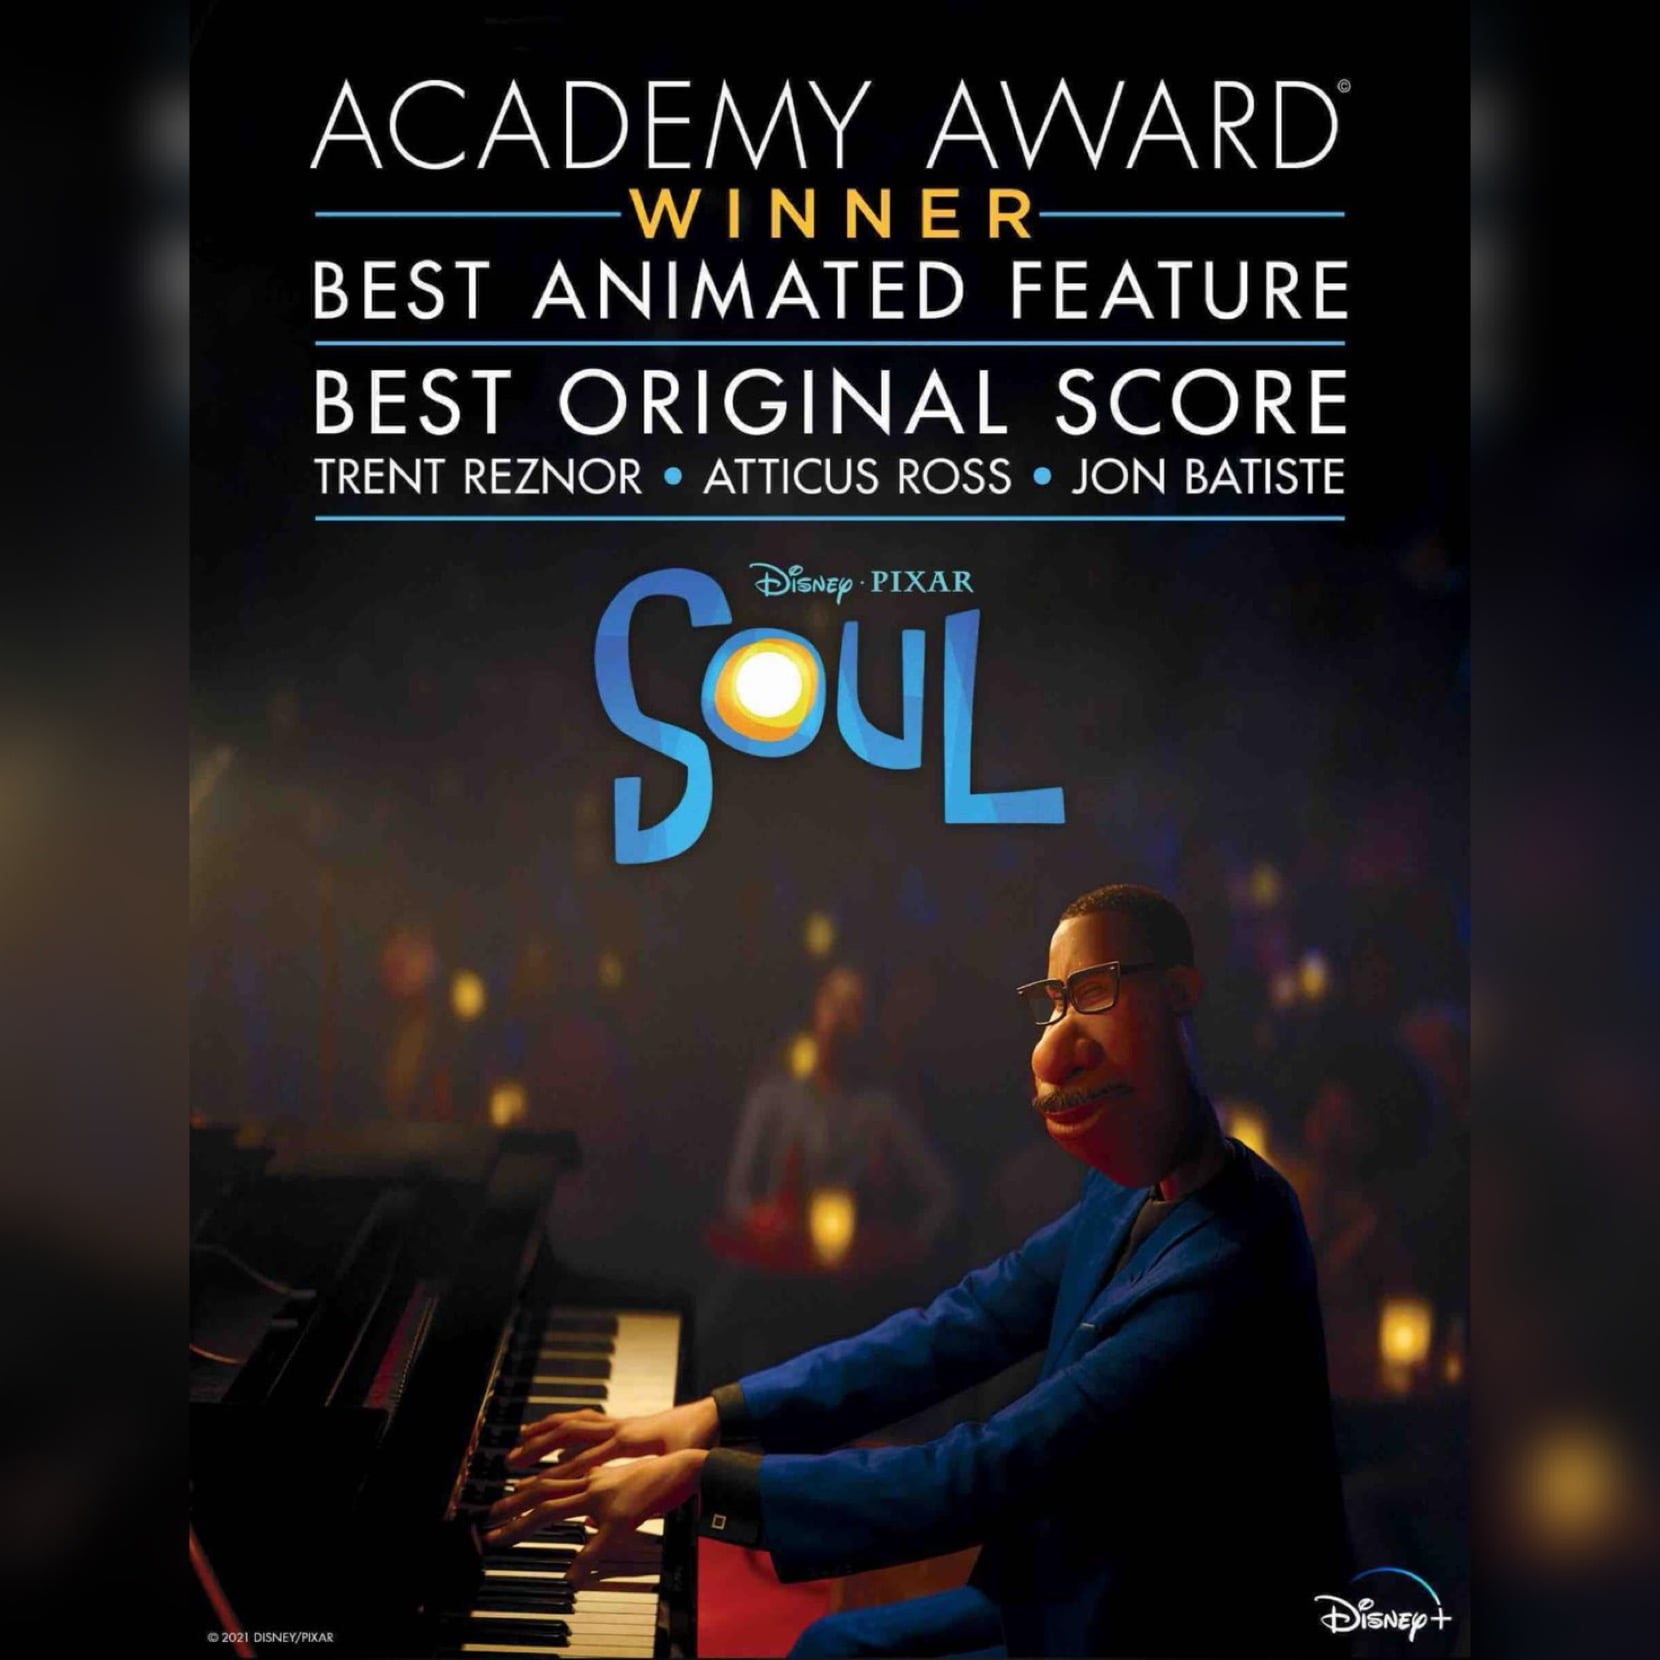 "Soul" wins academy awards image by Disney Music Group for use by 360 Magazine